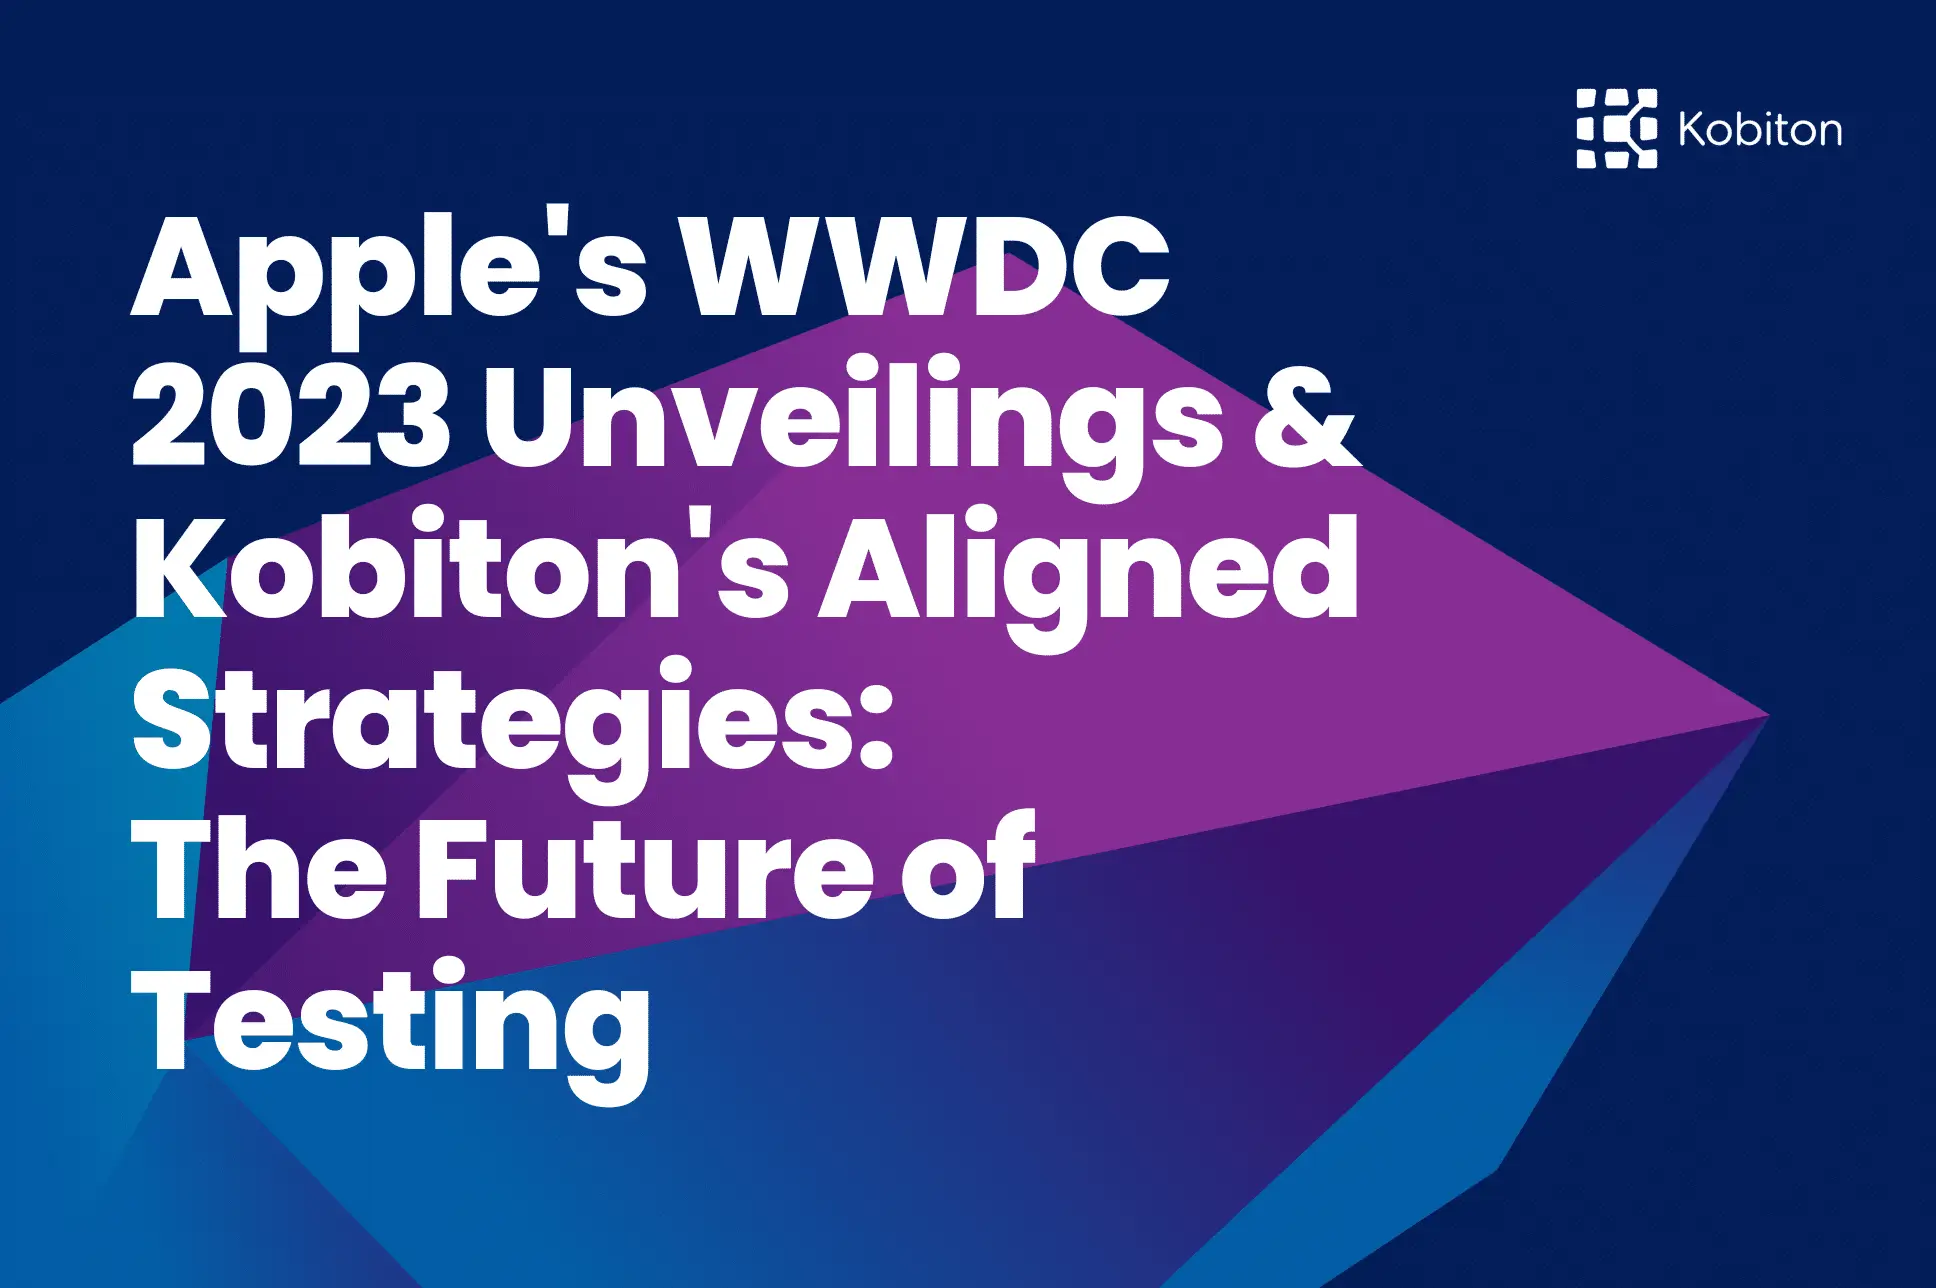 Apple's WWDC 2023 Unveilings & Kobiton's Aligned Strategies: The Future of Testing